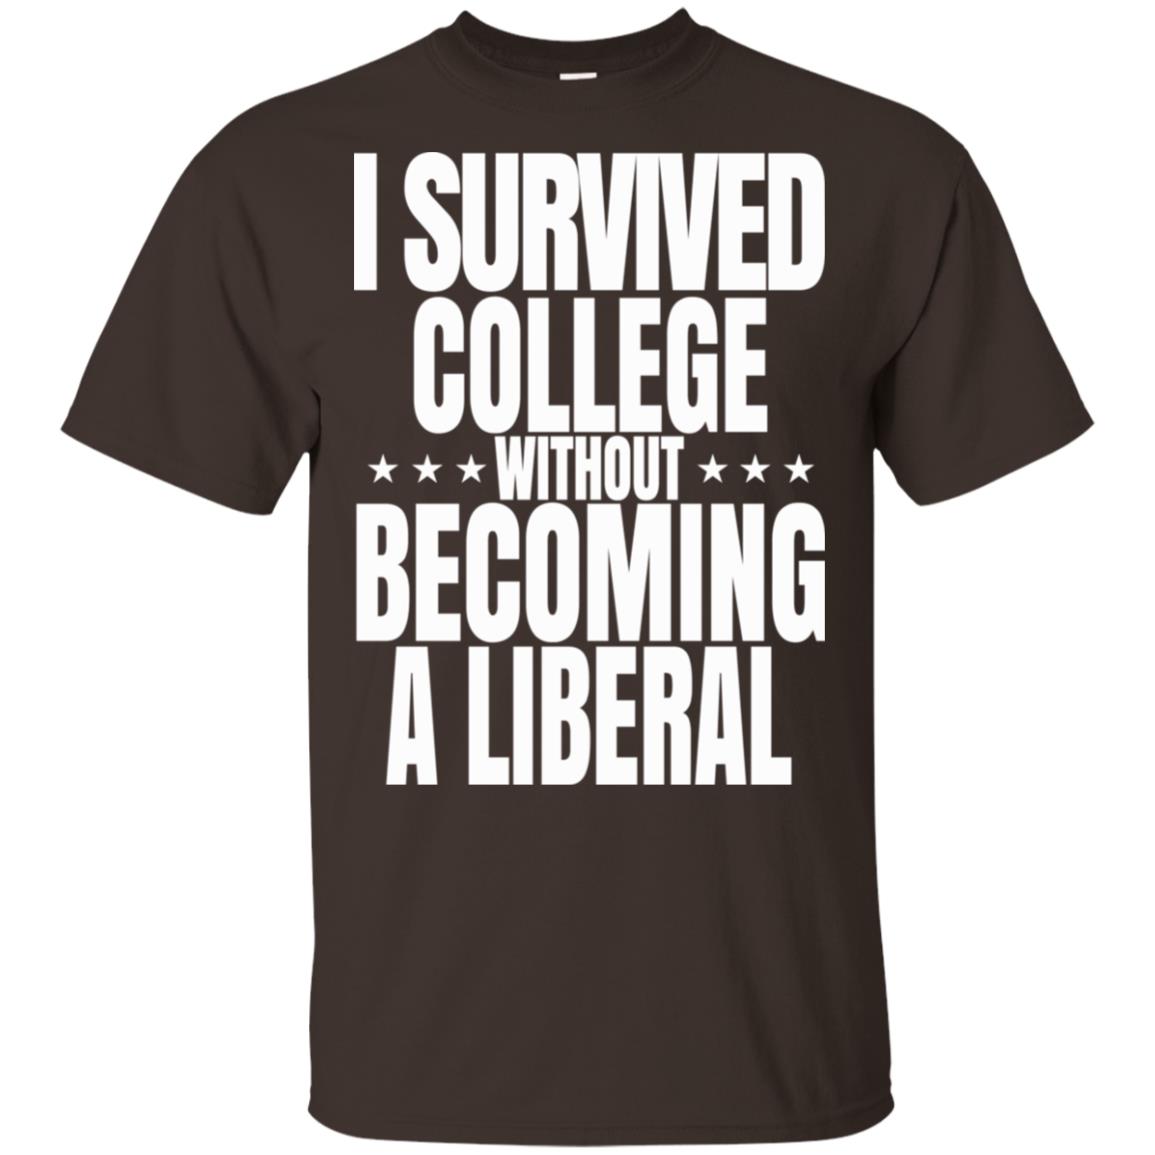 I Survived College Without Becoming Liberal 0sTees